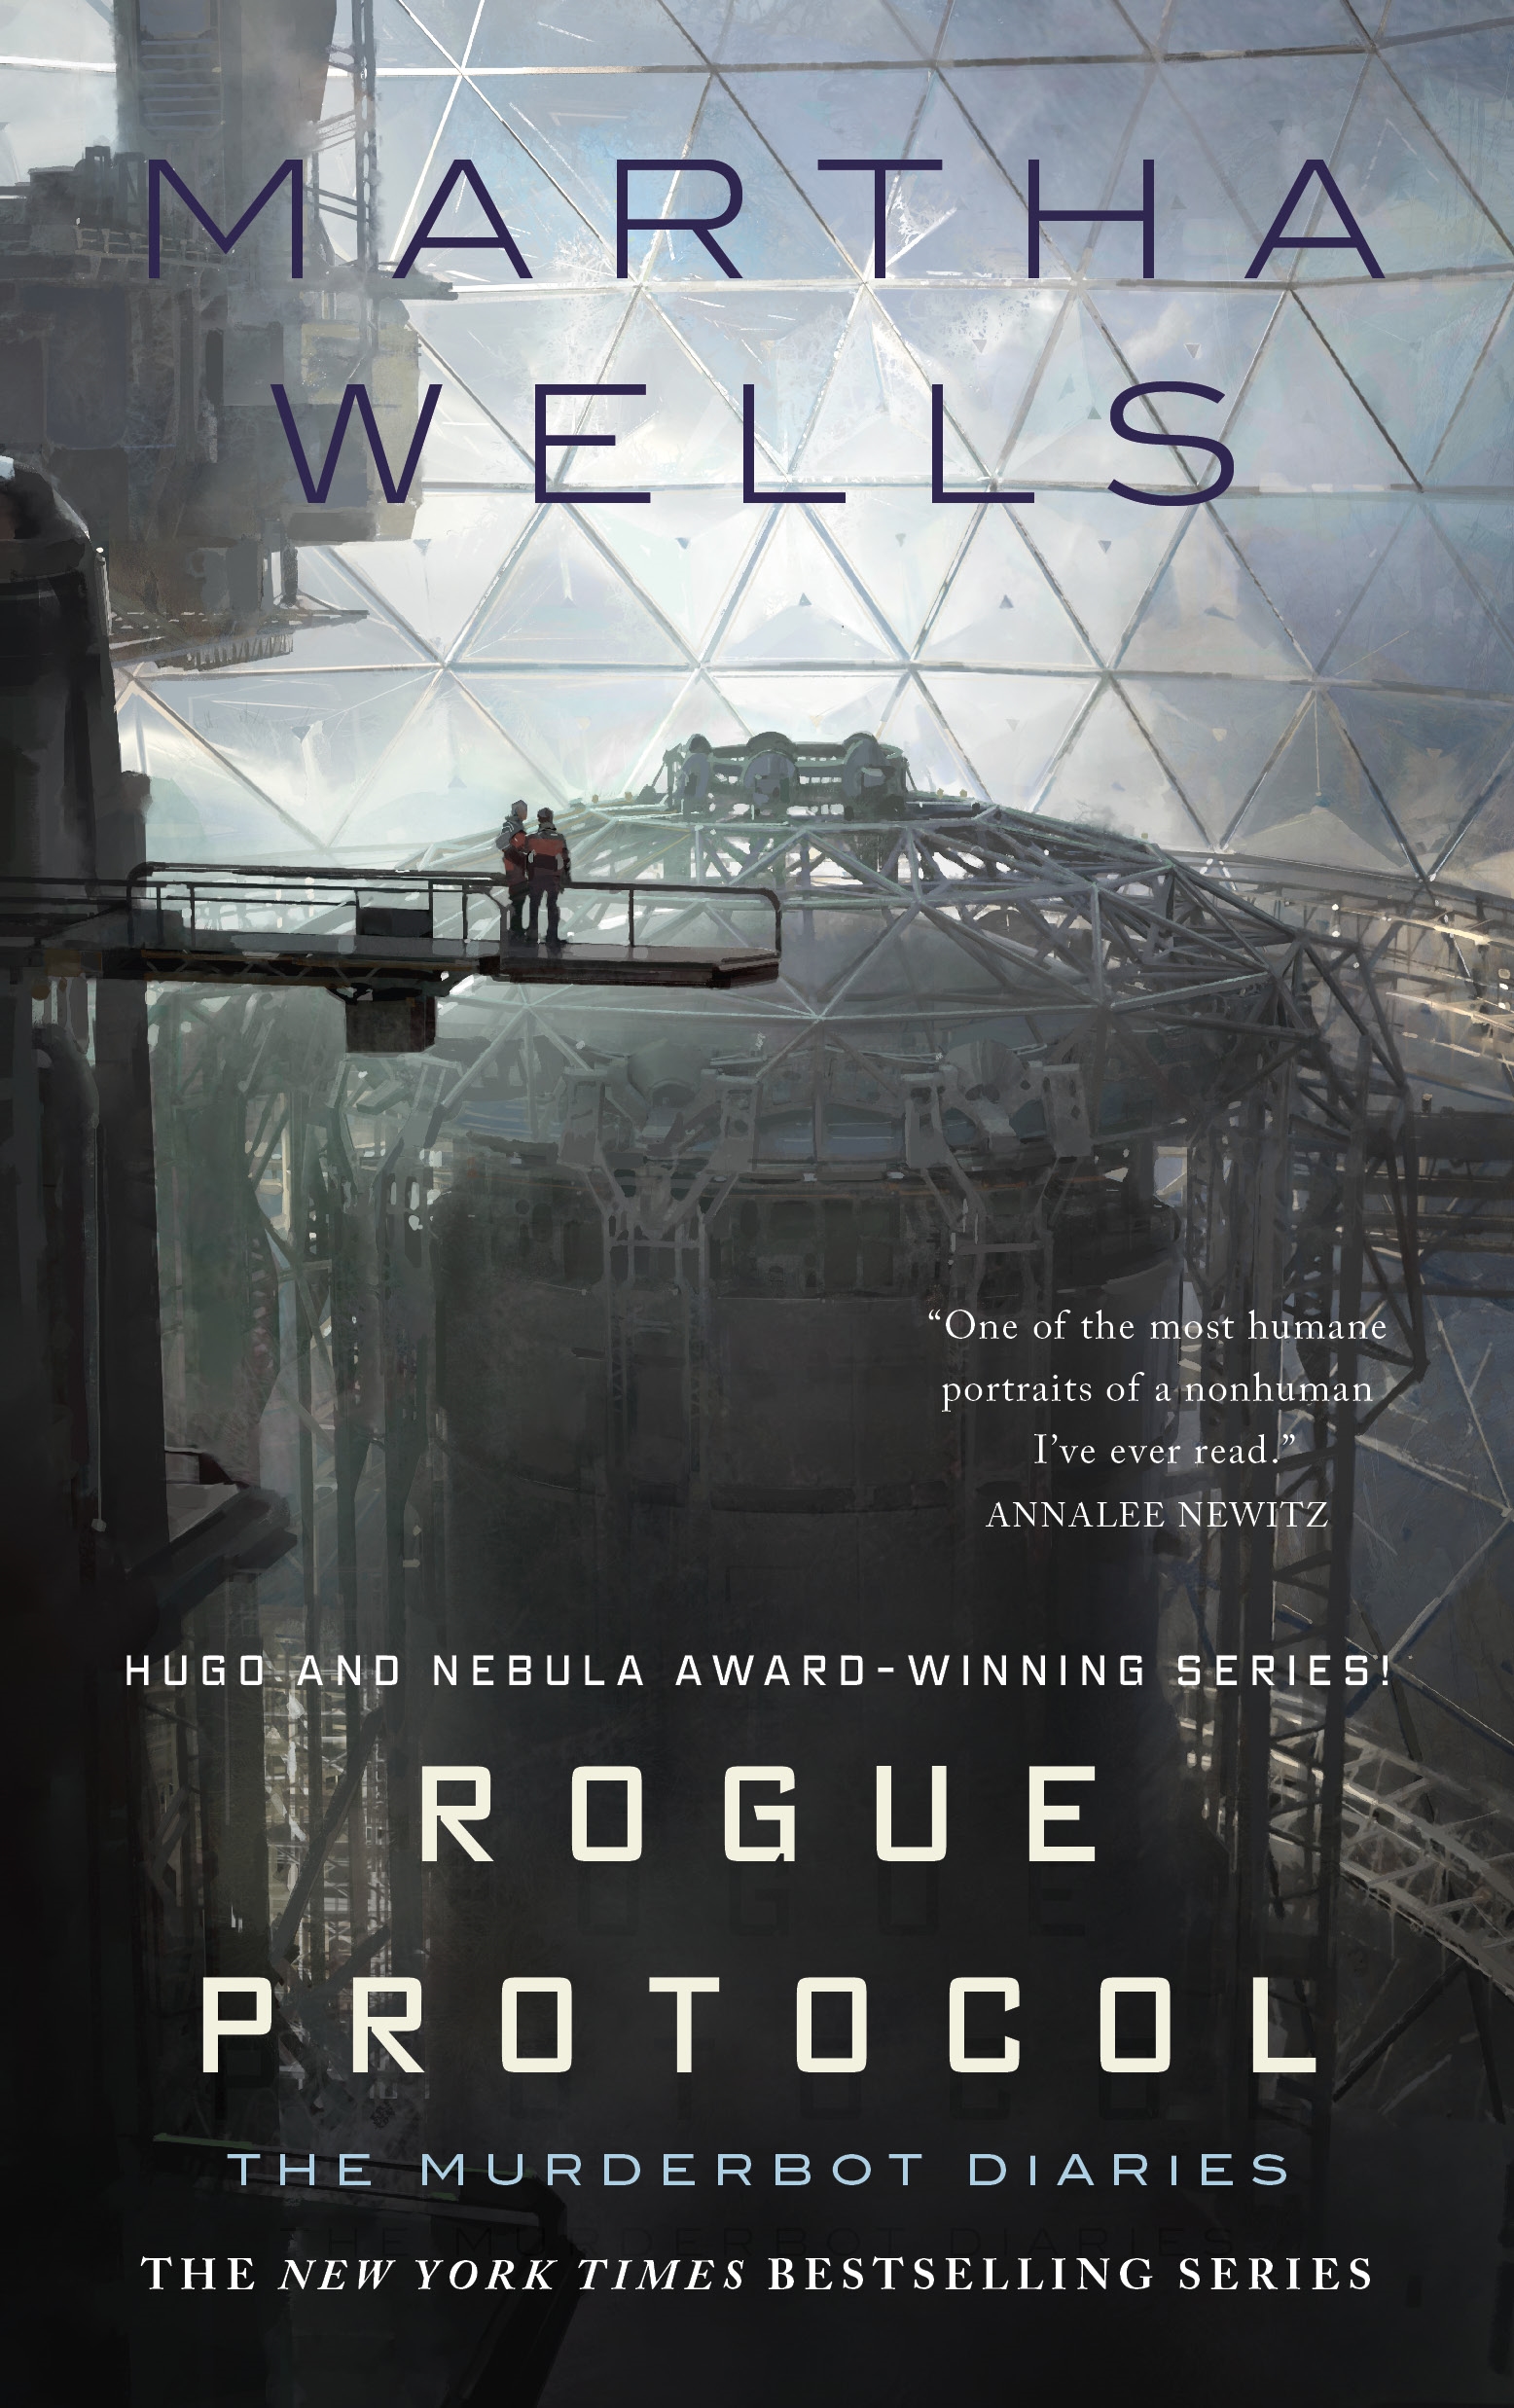 Rogue Protocol : The Murderbot Diaries by Martha Wells